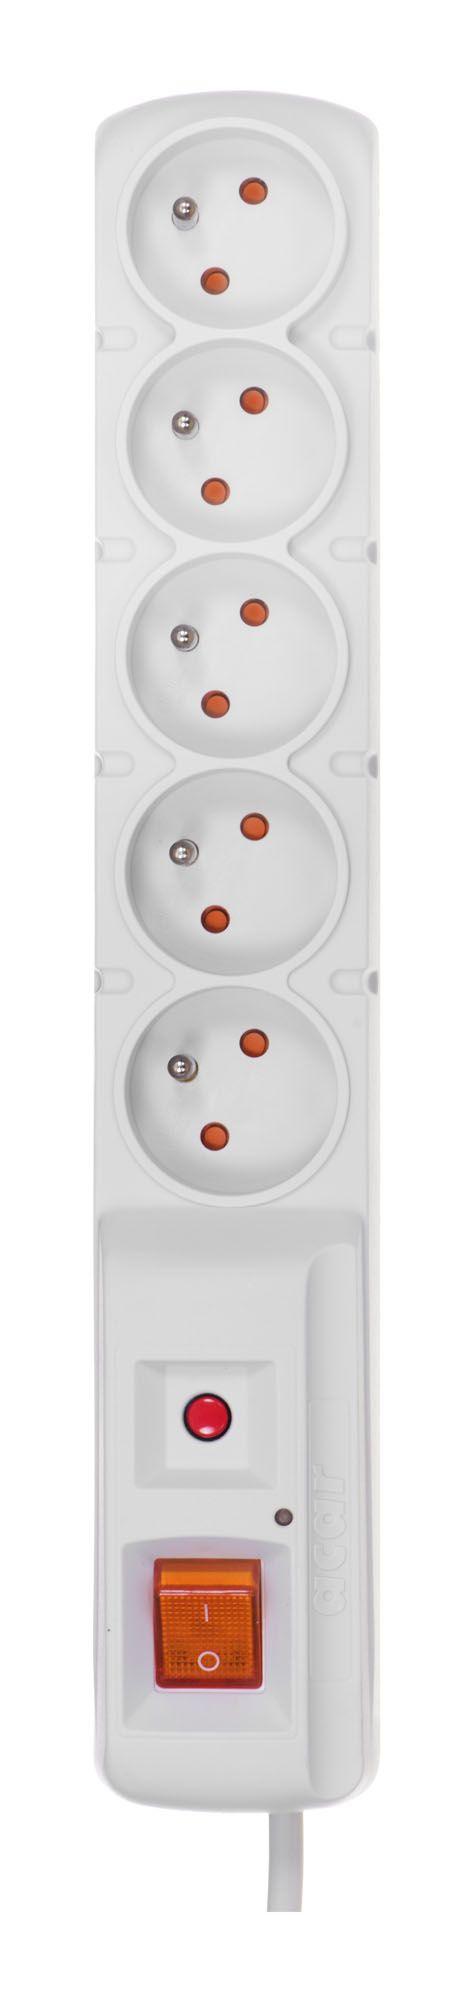 HSK DATA Acar F5 5m power extension 5 AC outlet(s) Indoor/Outdoor Grey